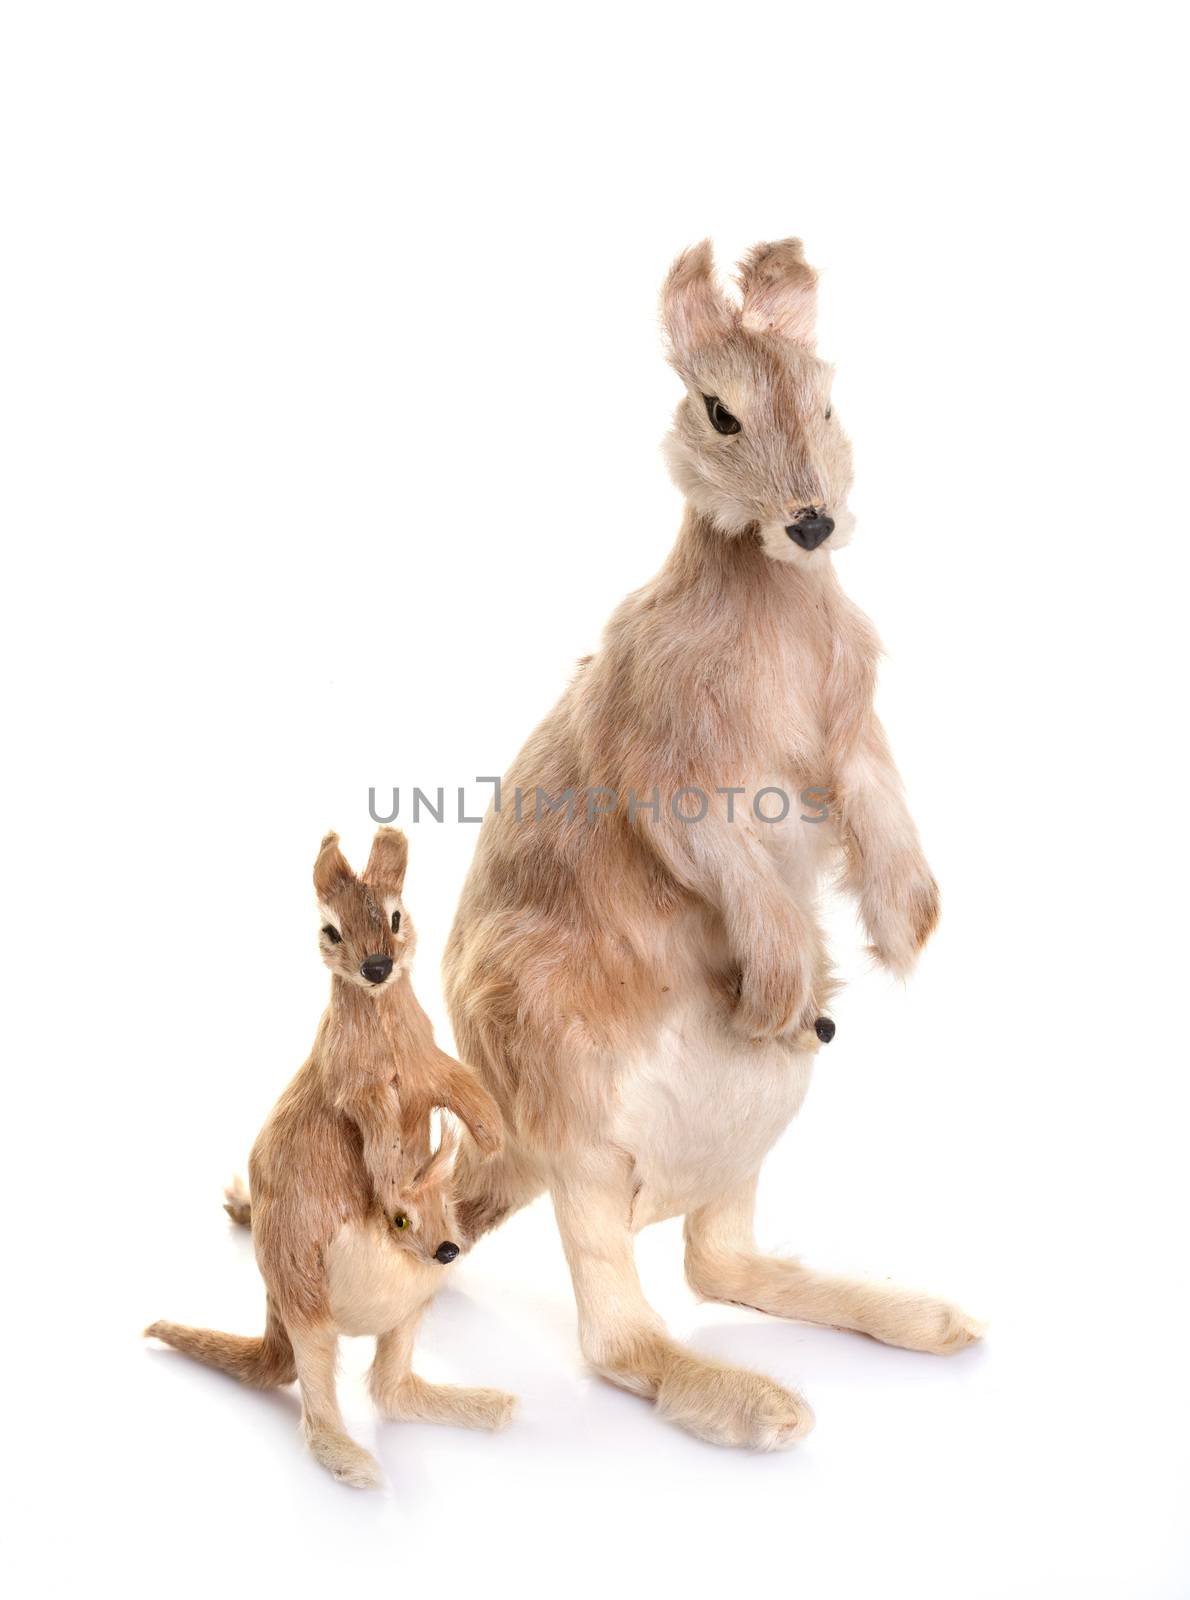 animal trinket in front of white background